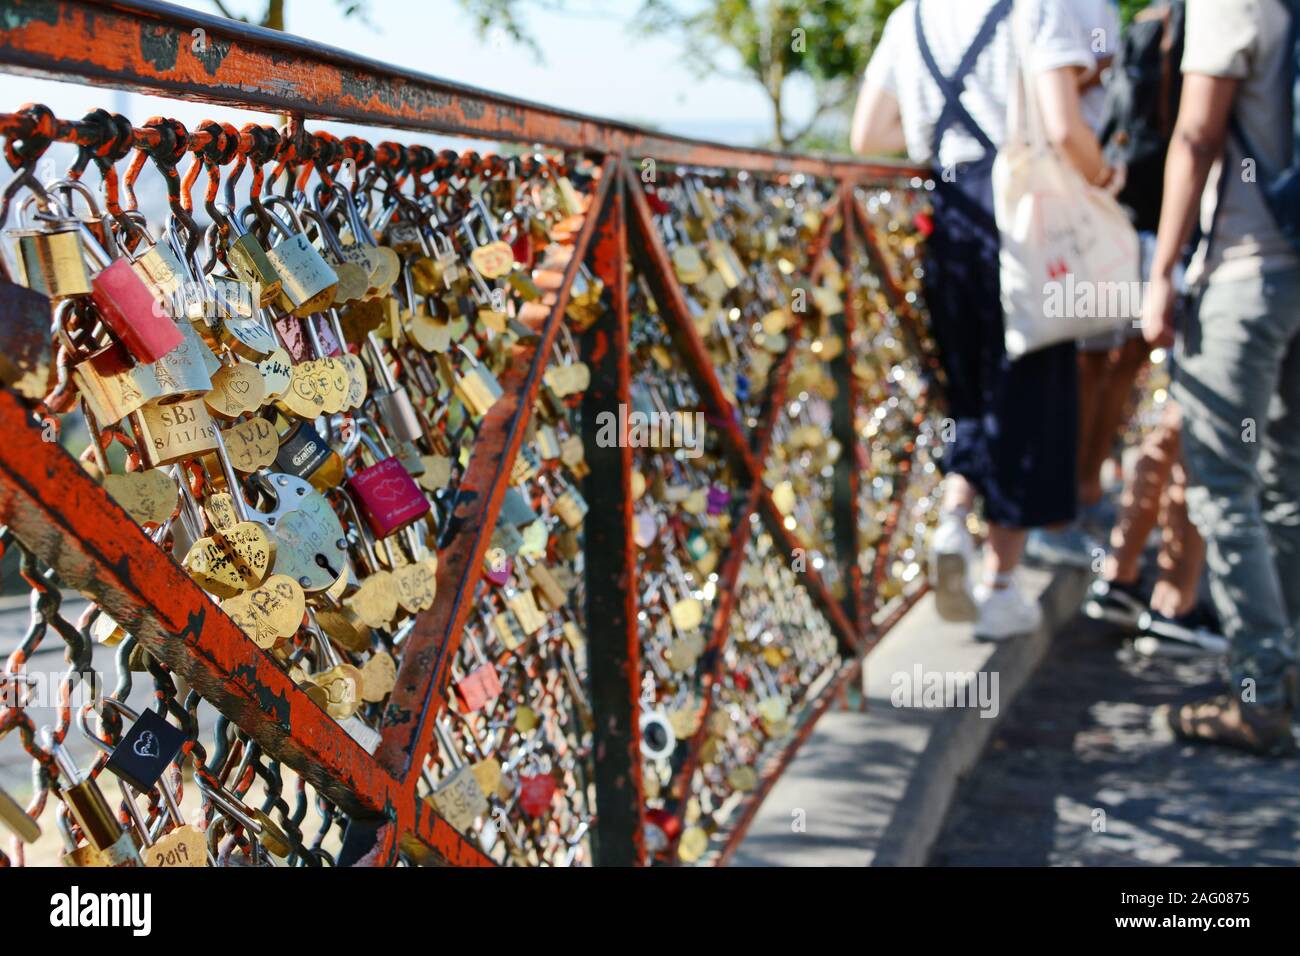 PARIS, FRANCE - SEPTEMBER 16, 2019: Numerous padlocks and combination locks fixed to the fence at the Sacre Coeur in Paris. Tourists lean on the fence Stock Photo